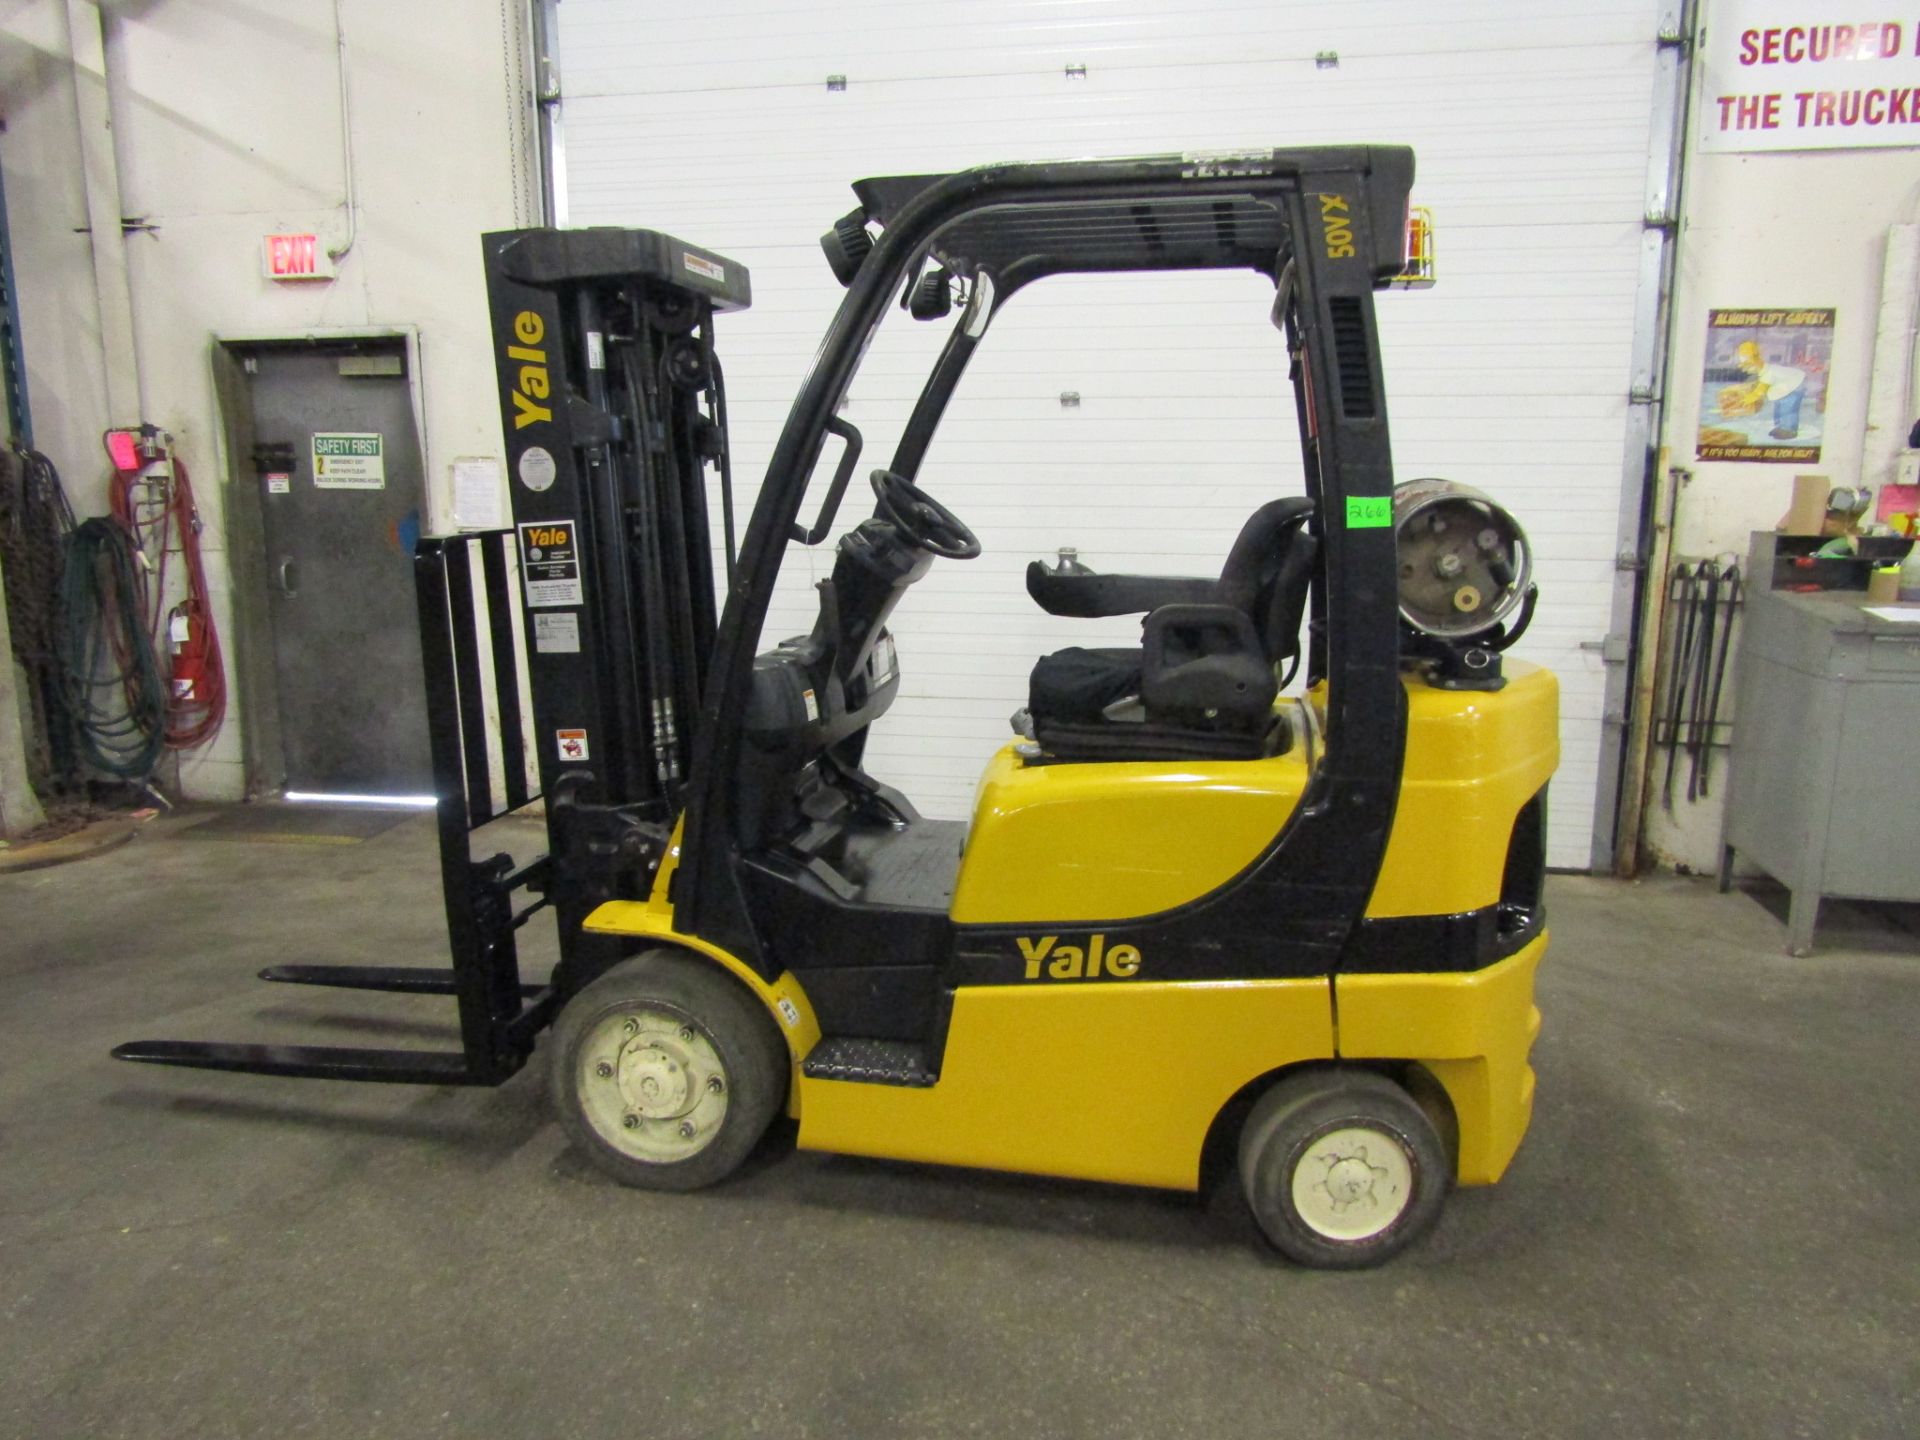 2012 Yale 5000lbs Capacity Forklift with 3-stage mast - LPG (propane) with sideshift (no propane